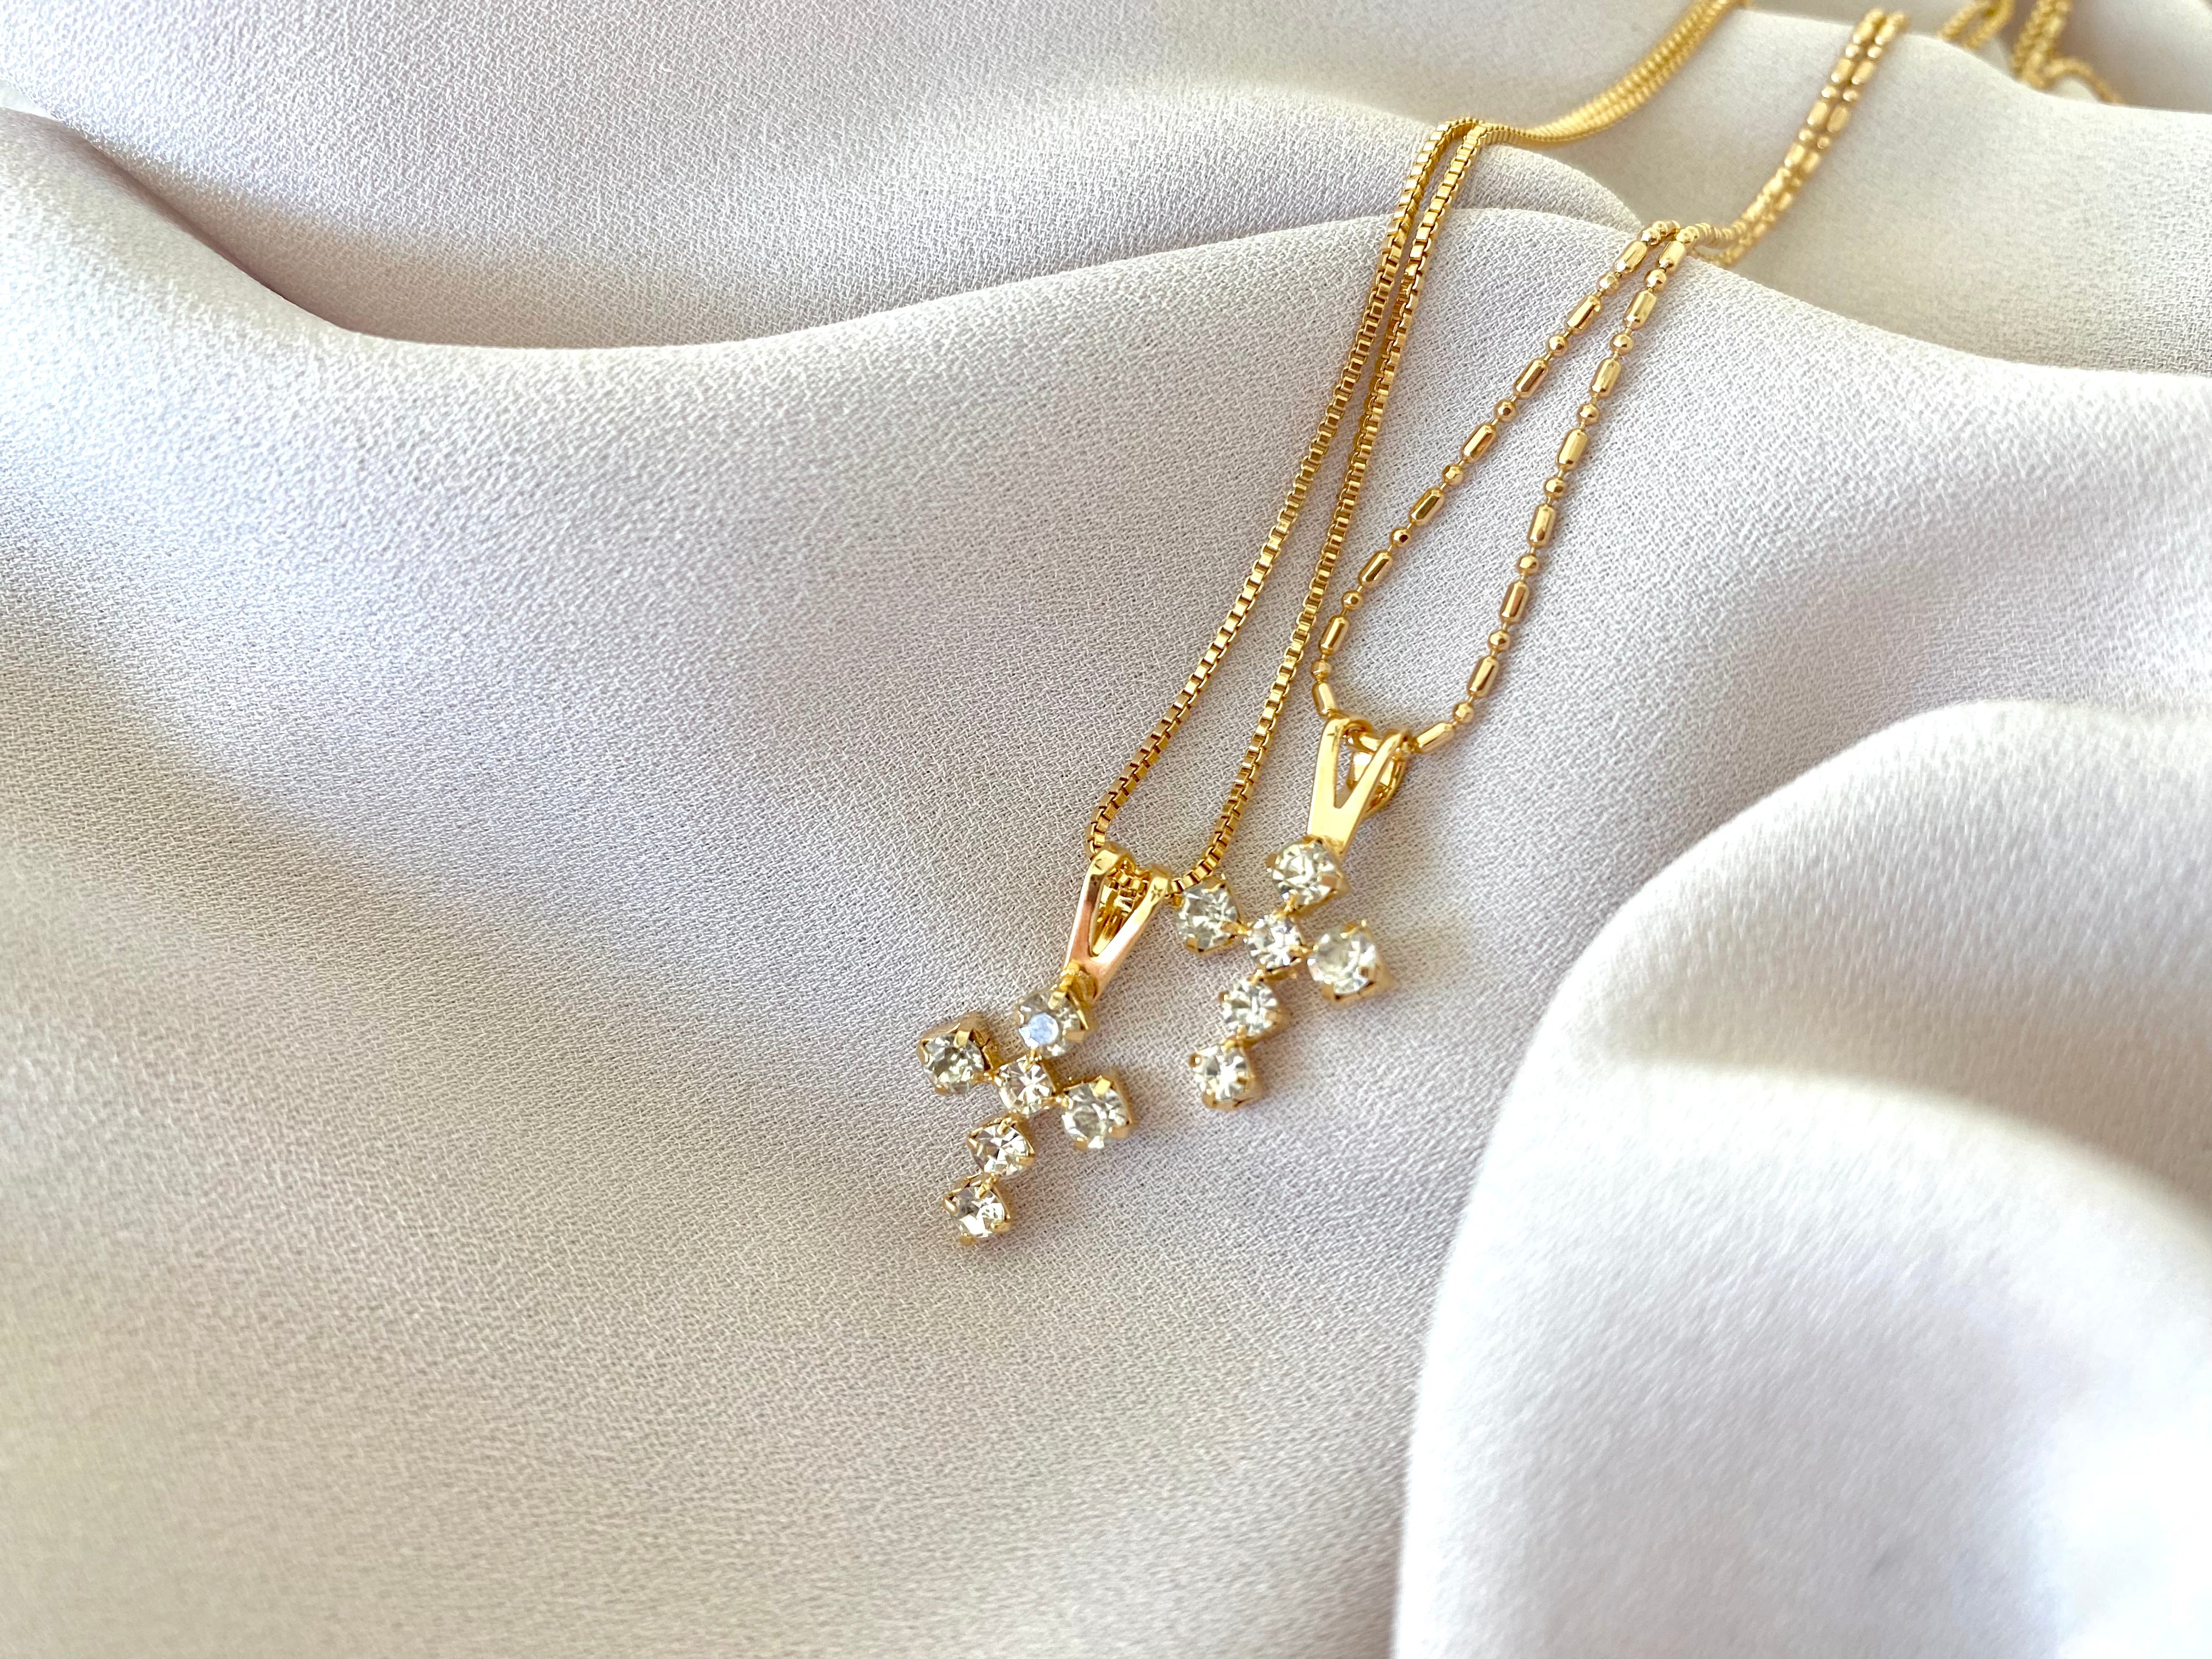 Dainty Cross Necklace Gold Filled Chain Crystal Covered Cross Pendant Pave Cross Charm Christian Jewelry Baptism Christmas Gift CZ Cross